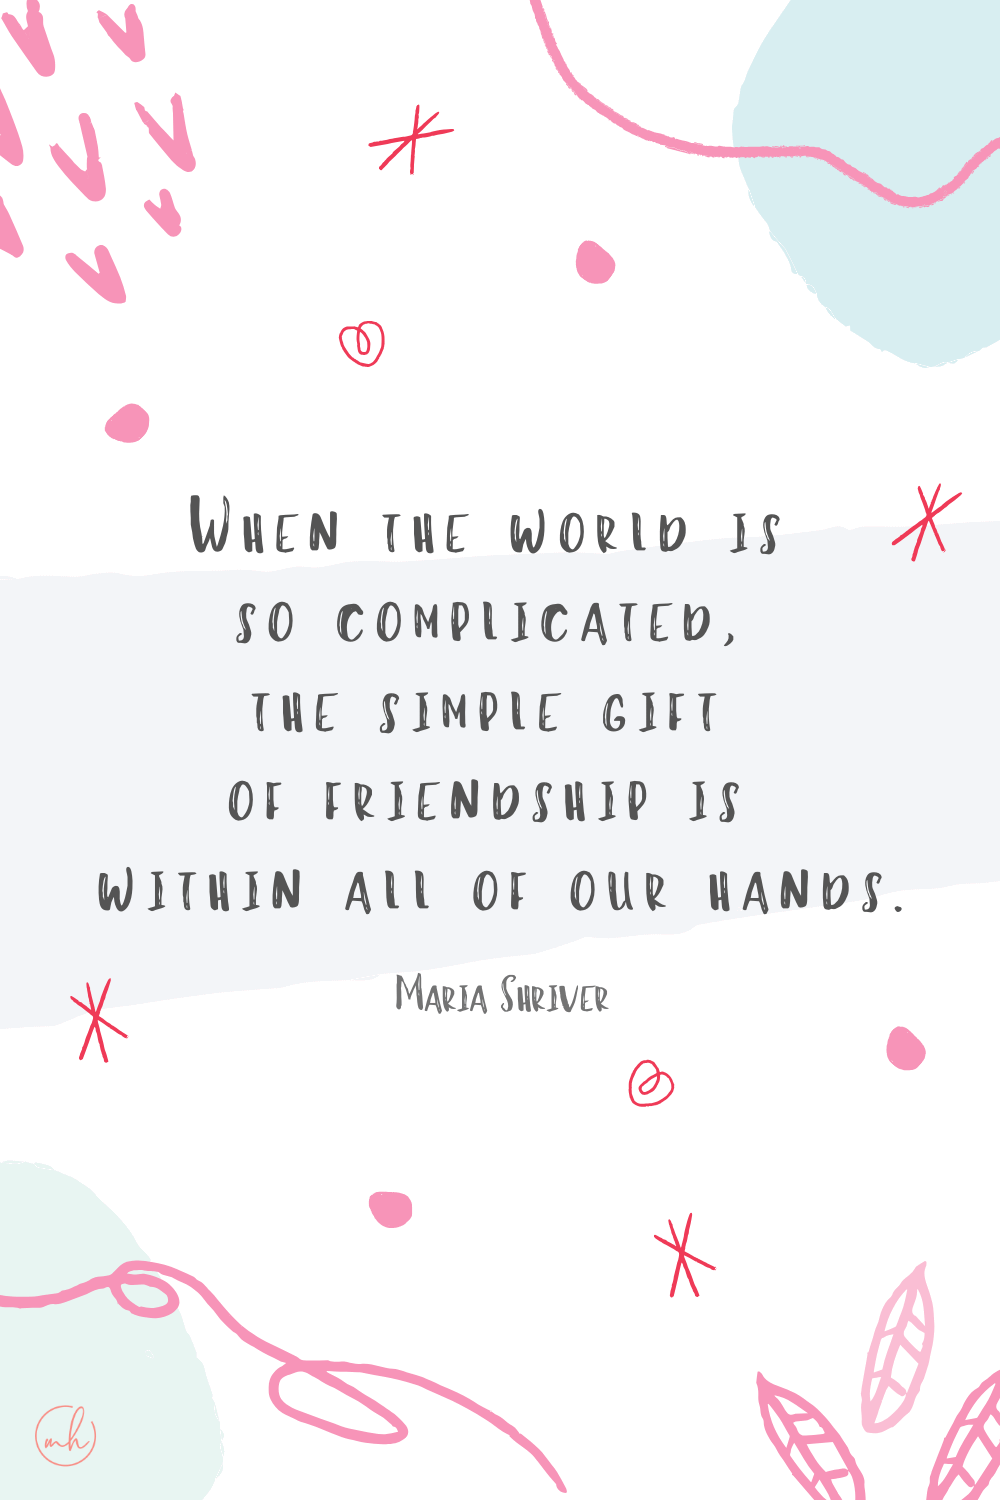 "When the world is so complicated, the simple gift of friendship is within all of our hands." - Maria Shriver